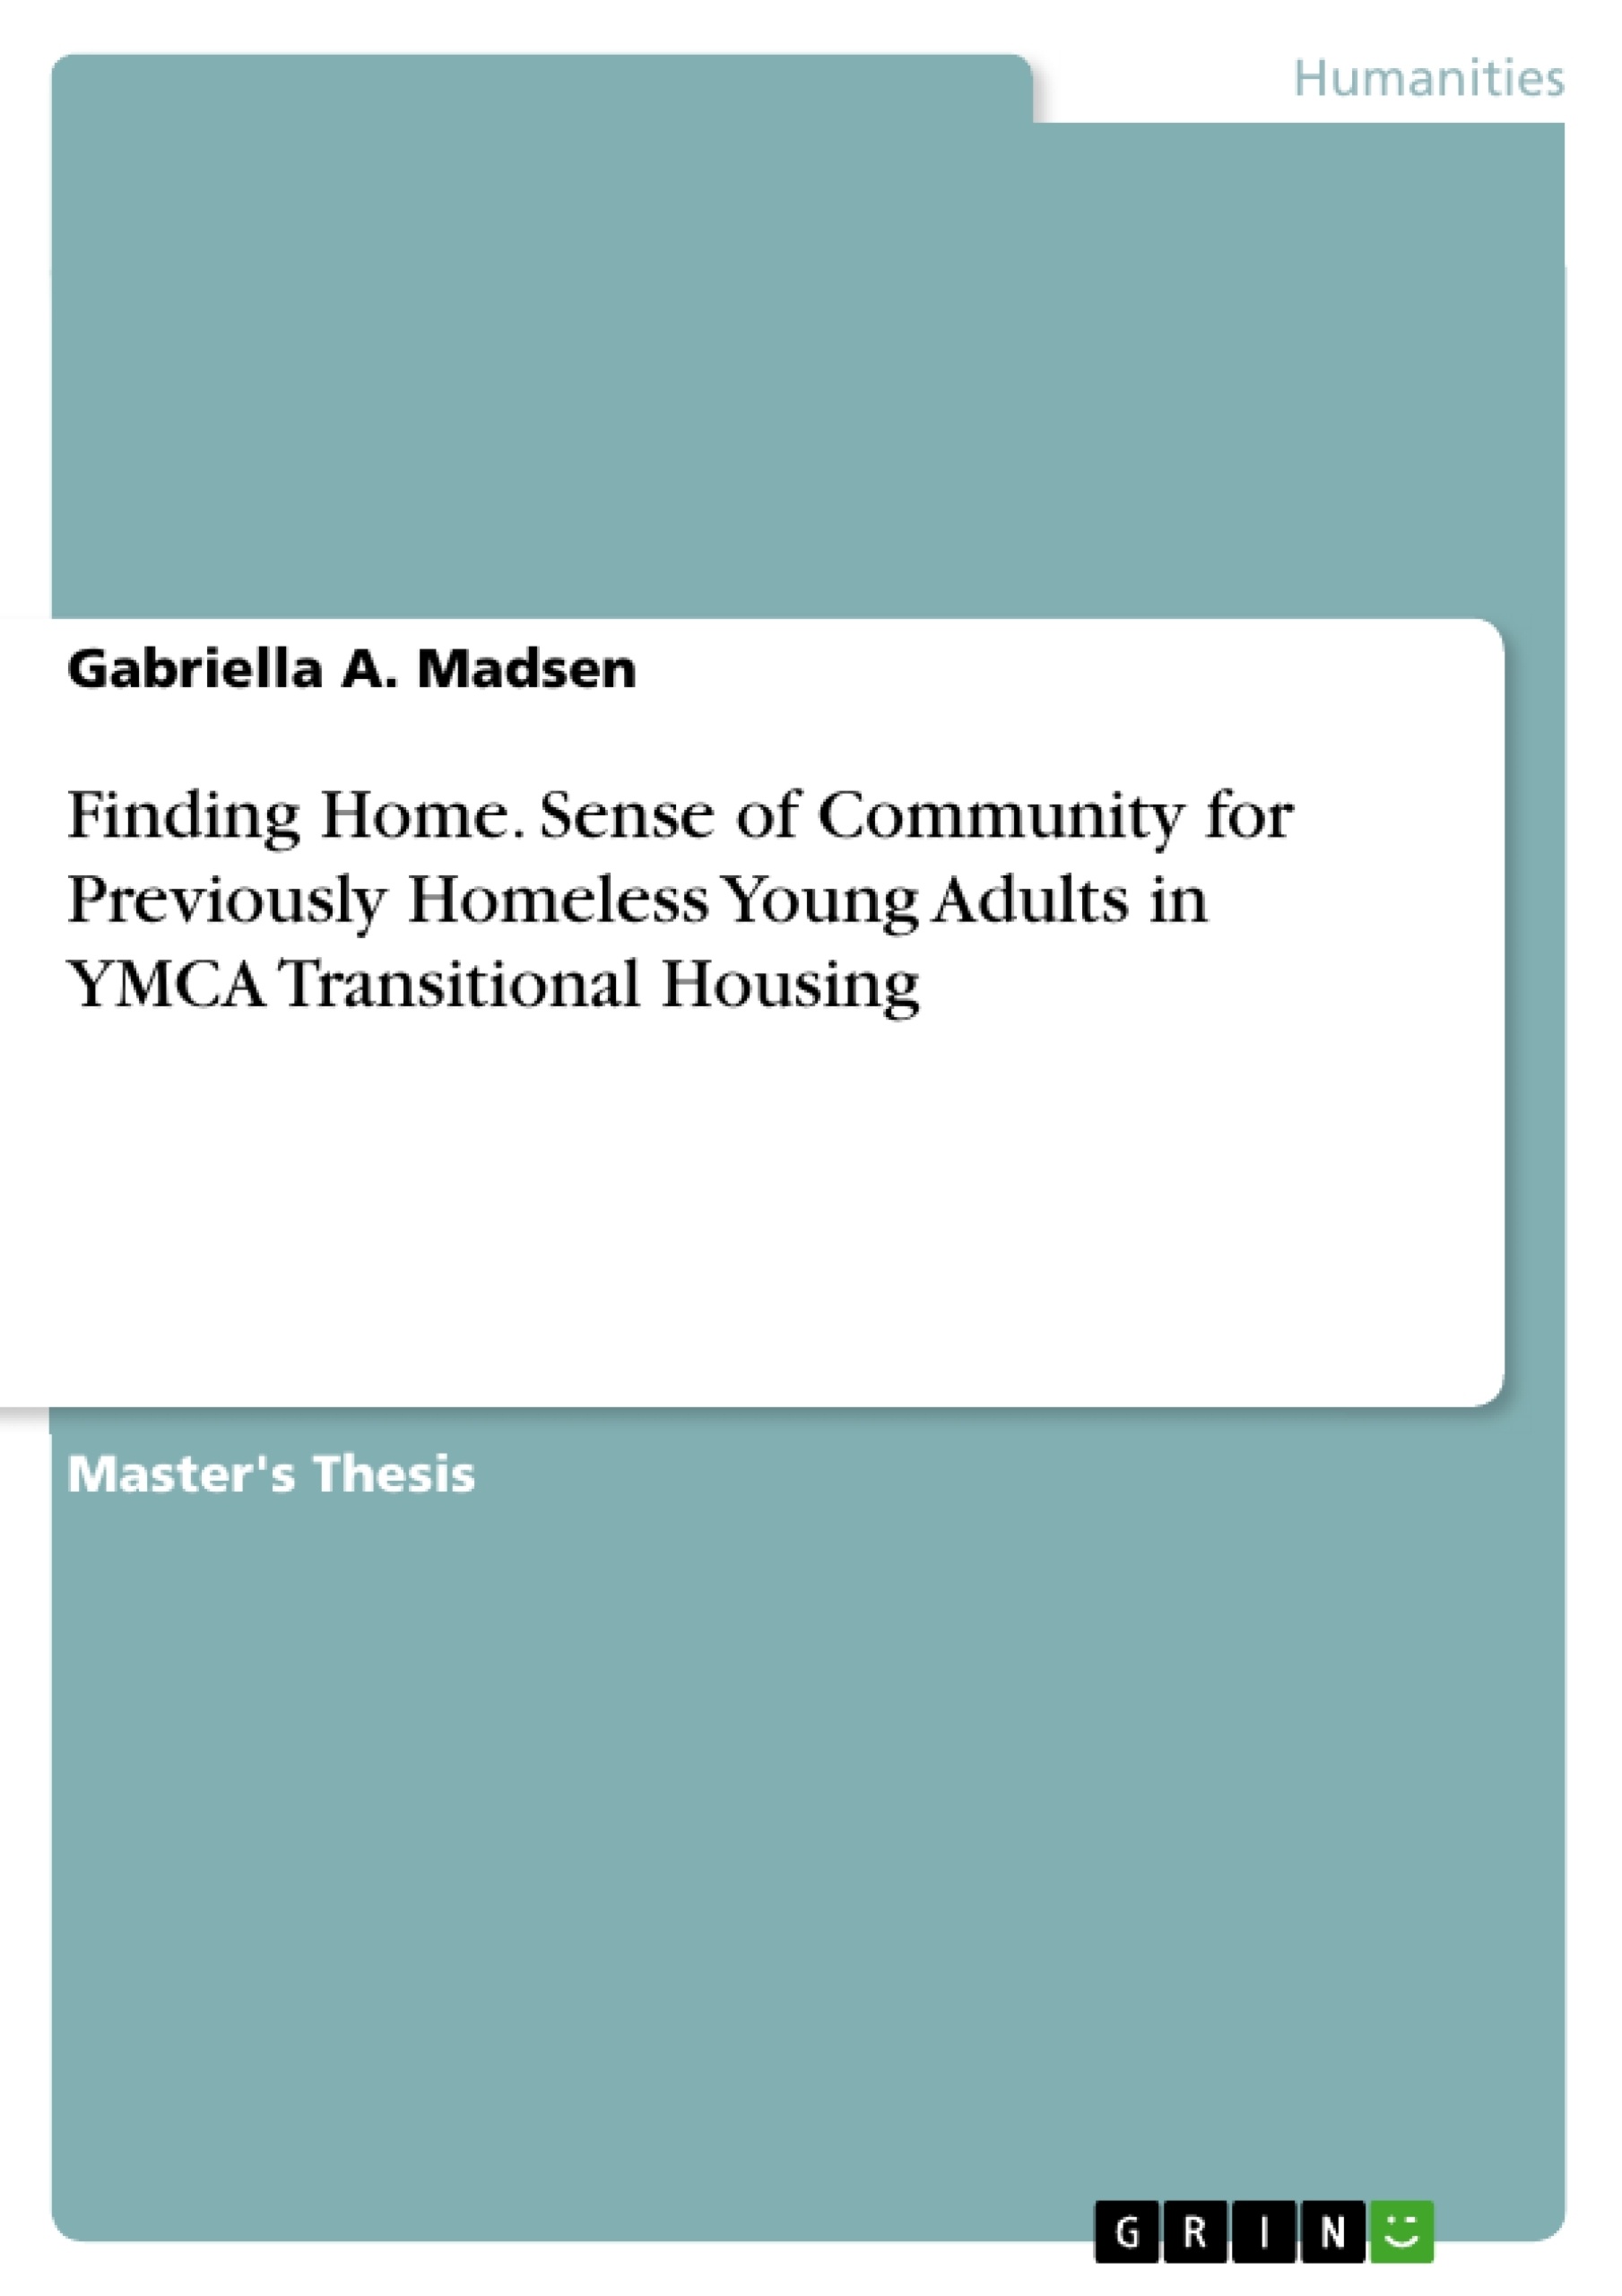 Title: Finding Home. Sense of Community for Previously Homeless Young Adults in YMCA Transitional Housing